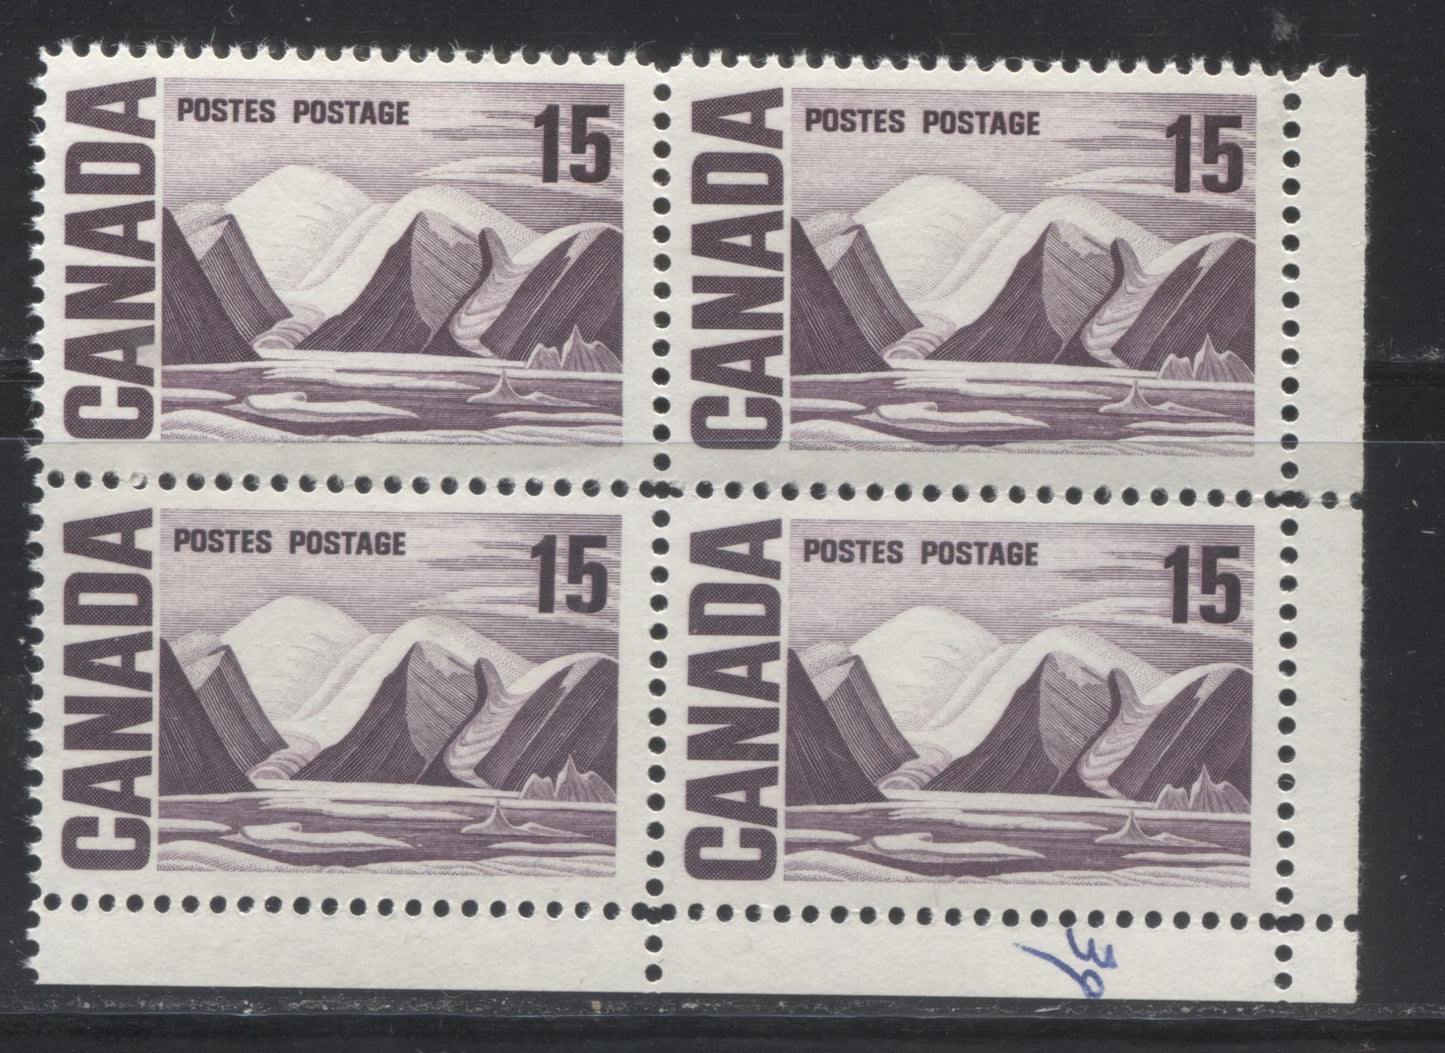 Lot 35 Canada #463vii 15c Deep Reddish Violet Greenland Mountains, 1967-1973 Centennial Definitive Issue, A VFNH LR Field Stock Block Of 4 On HB11 Vertical Wove & Ribbed Paper With Smooth Dex Gum, Plastic Flow Variety